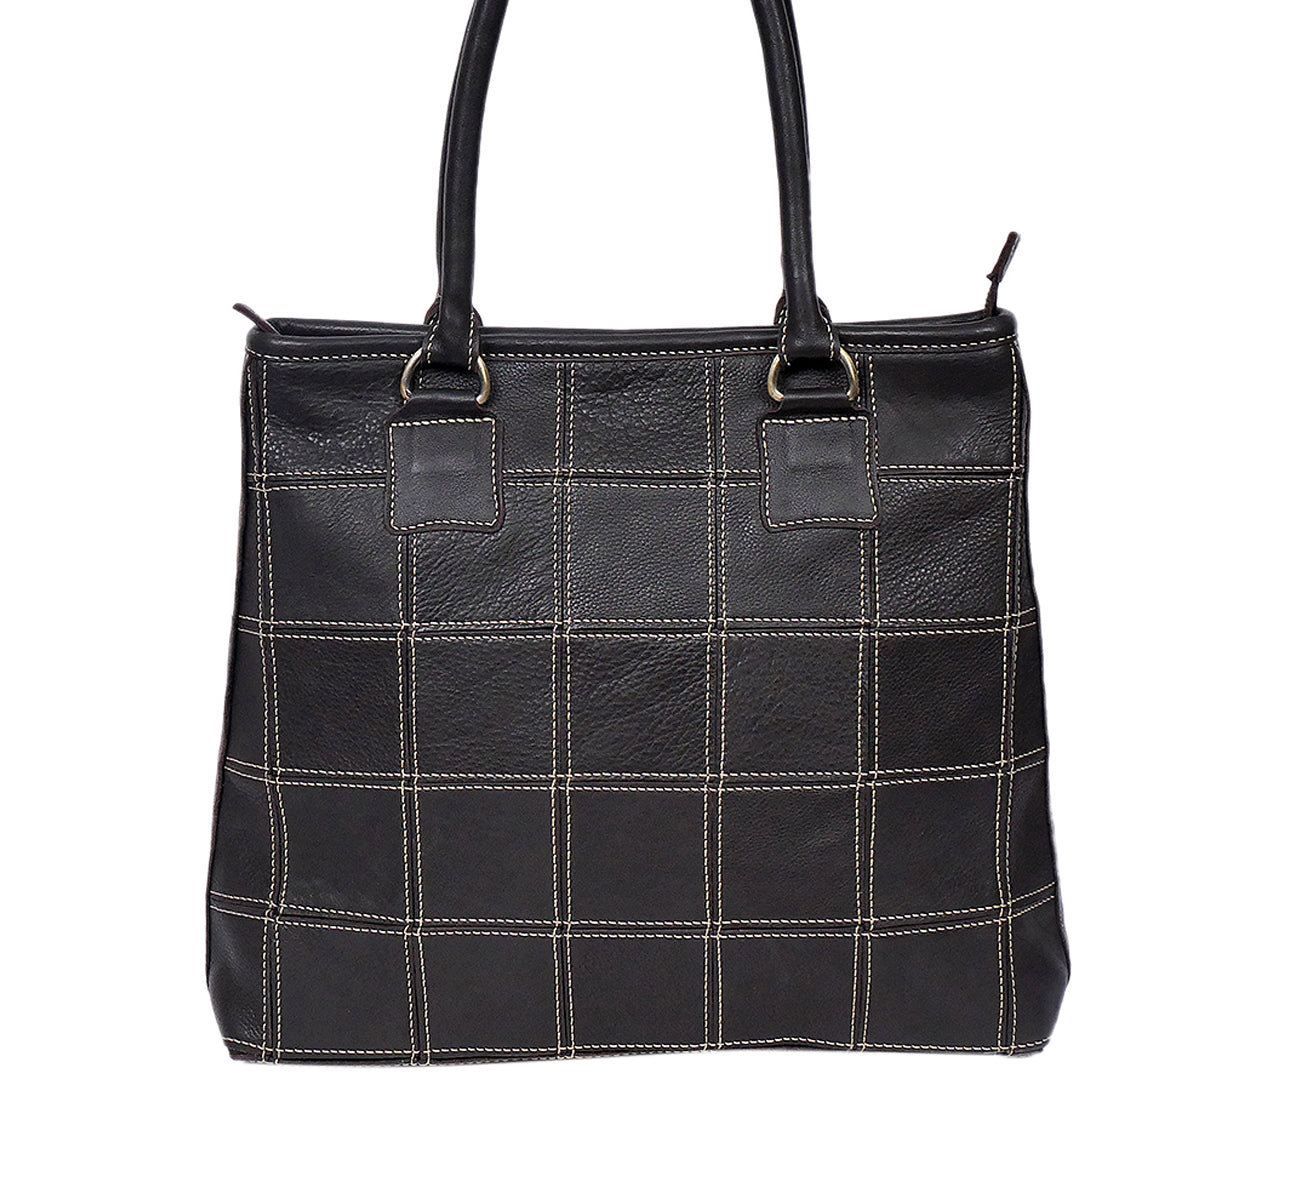 Elevate Your Style with our Black Leather Tote Bag - Classic Elegance with White Stitching. - CELTICINDIA